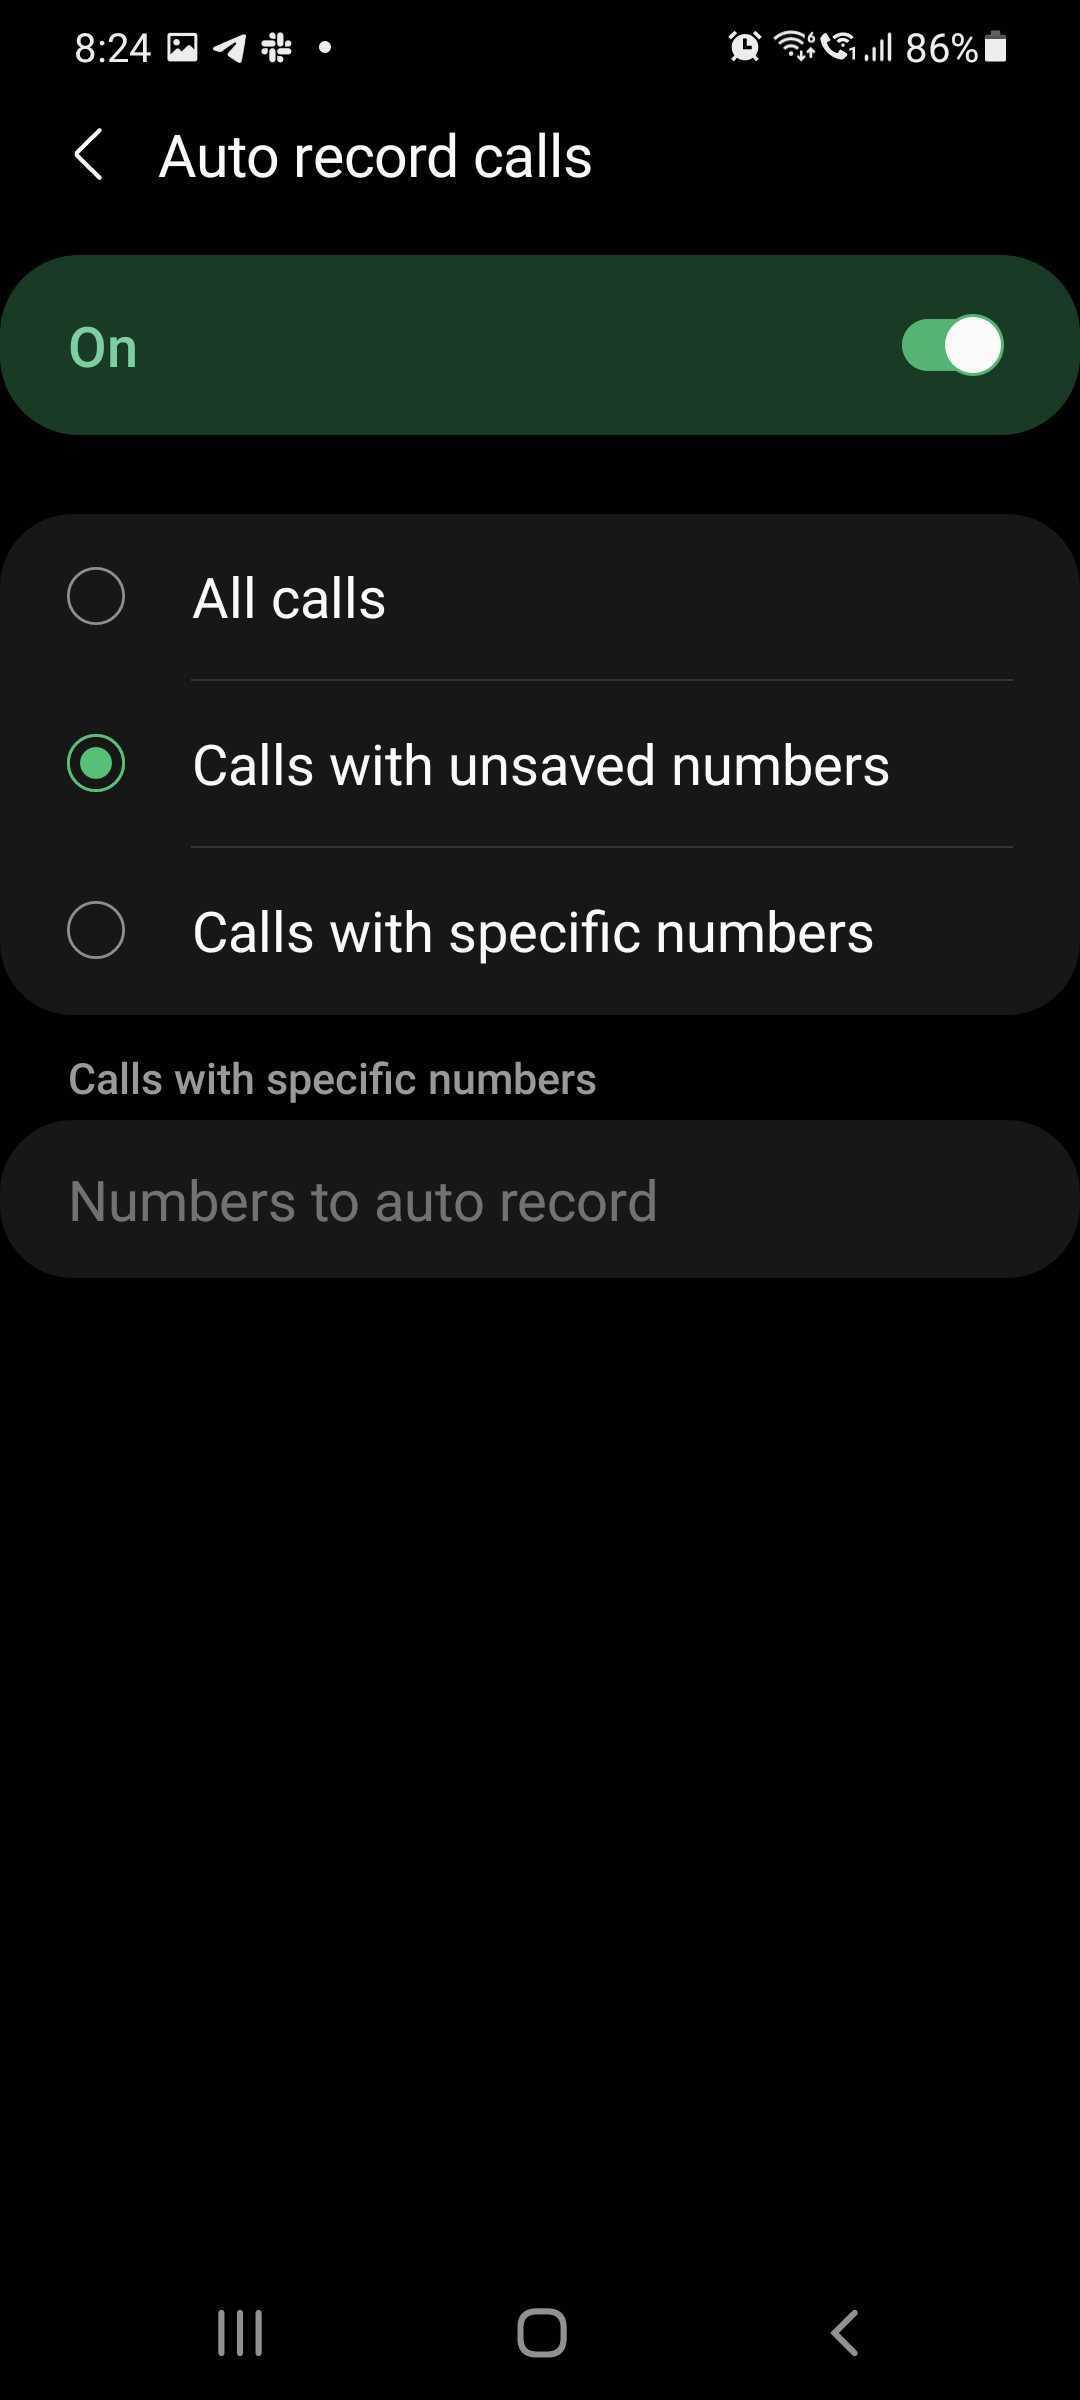 How to record calls on a Samsung Galaxy smartphone - SamMobile